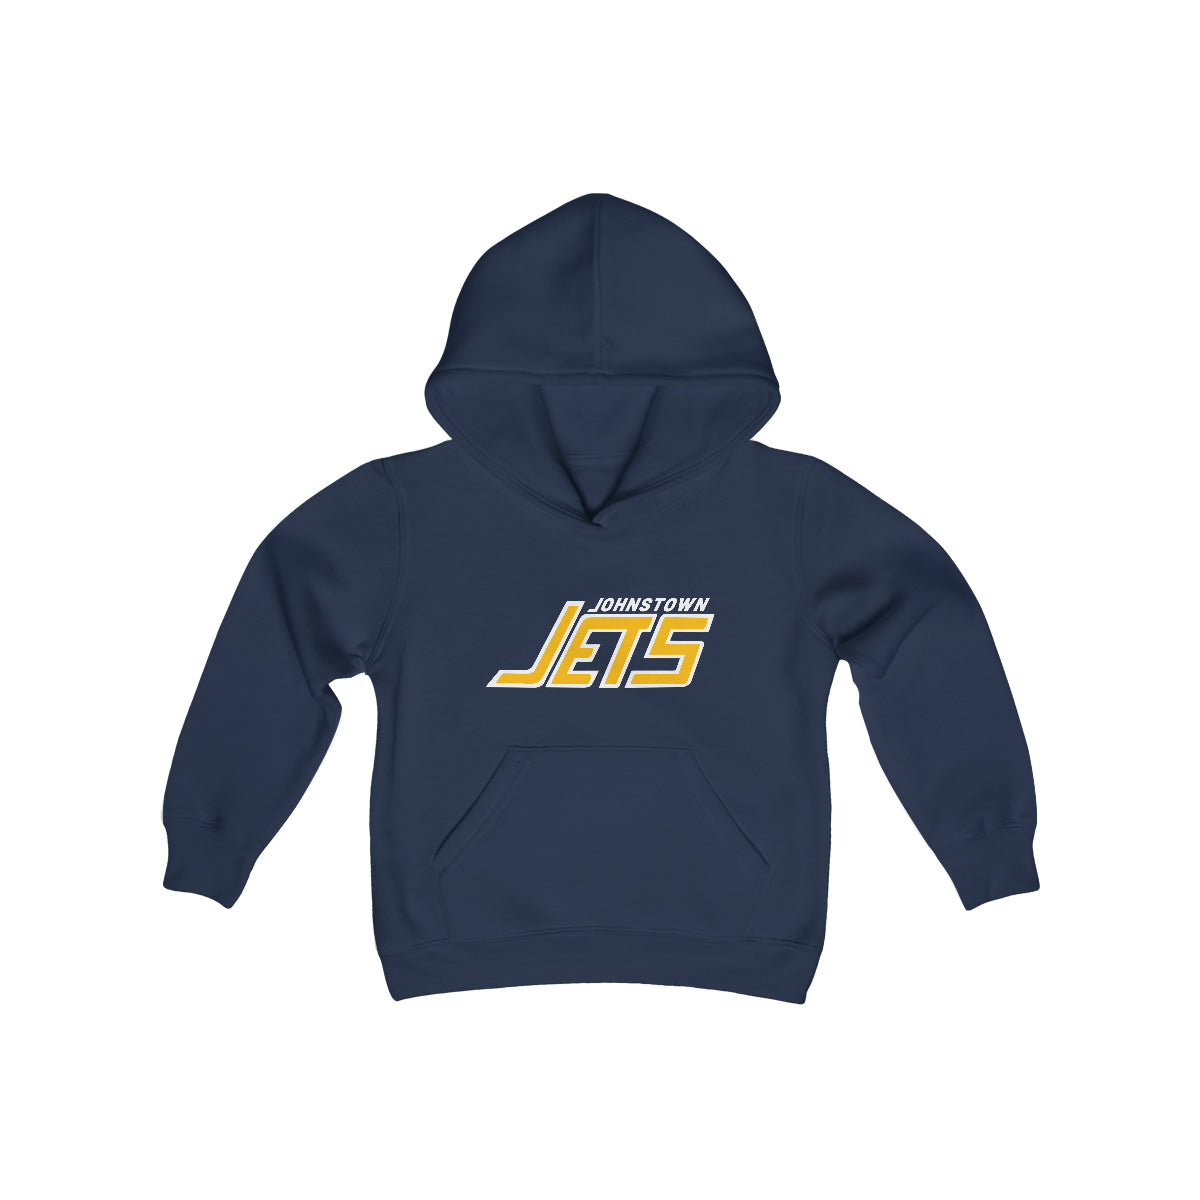 Johnstown Jets Hoodie (Youth)